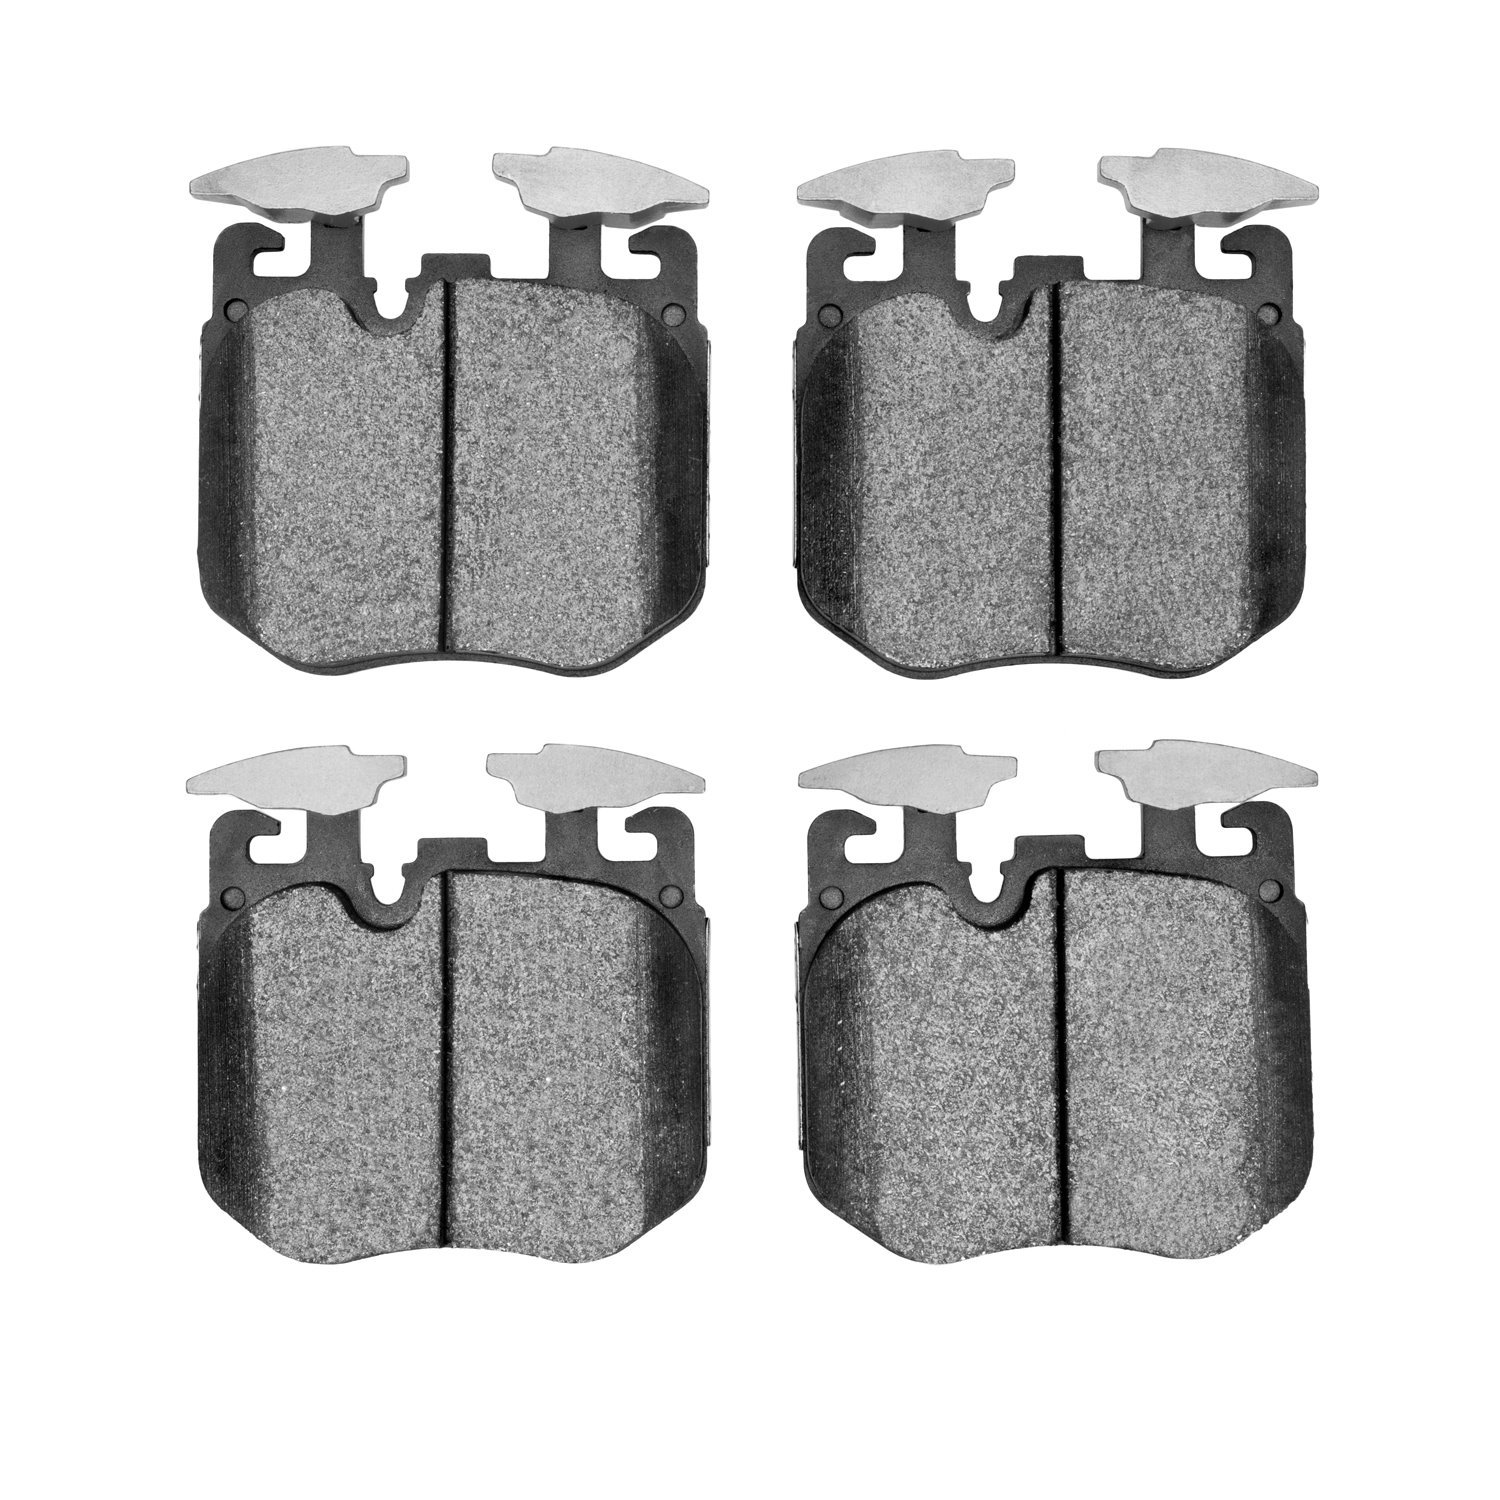 1553-1868-00 5000 Advanced Low-Metallic Brake Pads, Fits Select BMW, Position: Front